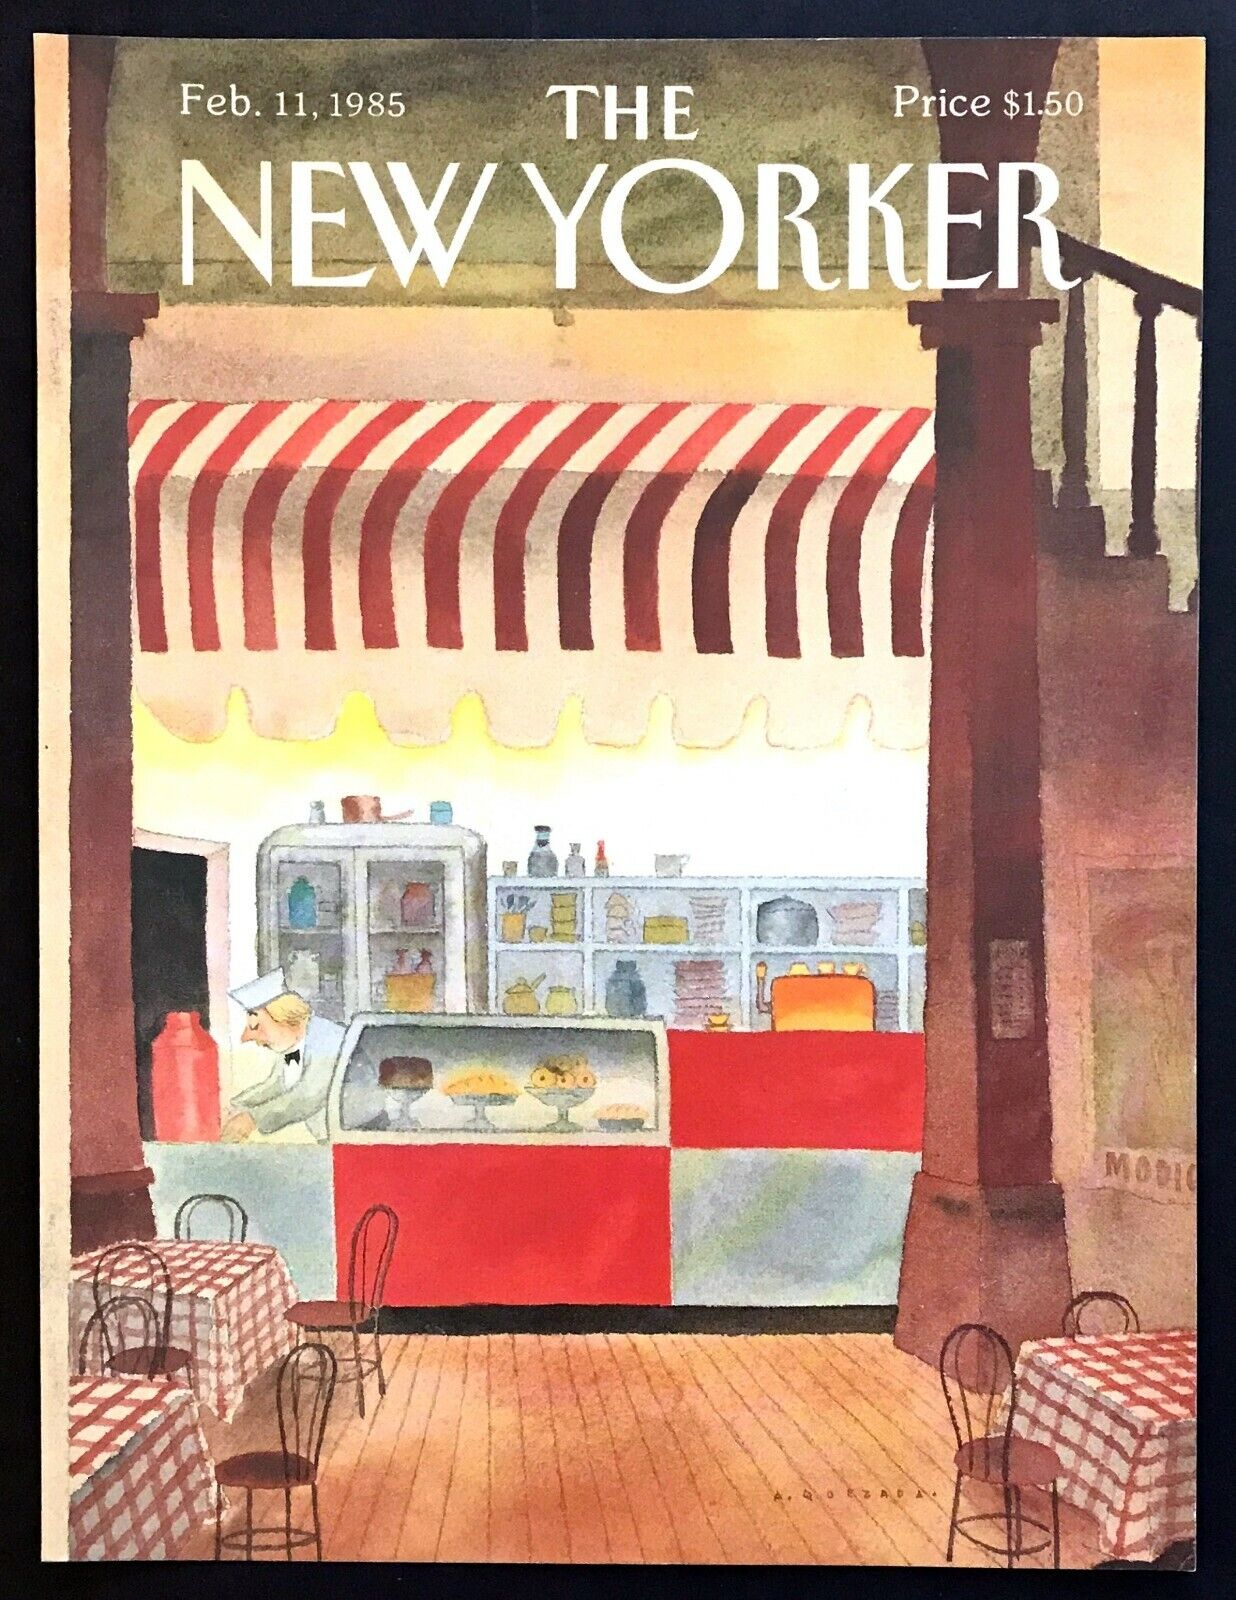 February 11, 1985 The New Yorker Small City Bakery Opening art COVER ONLY